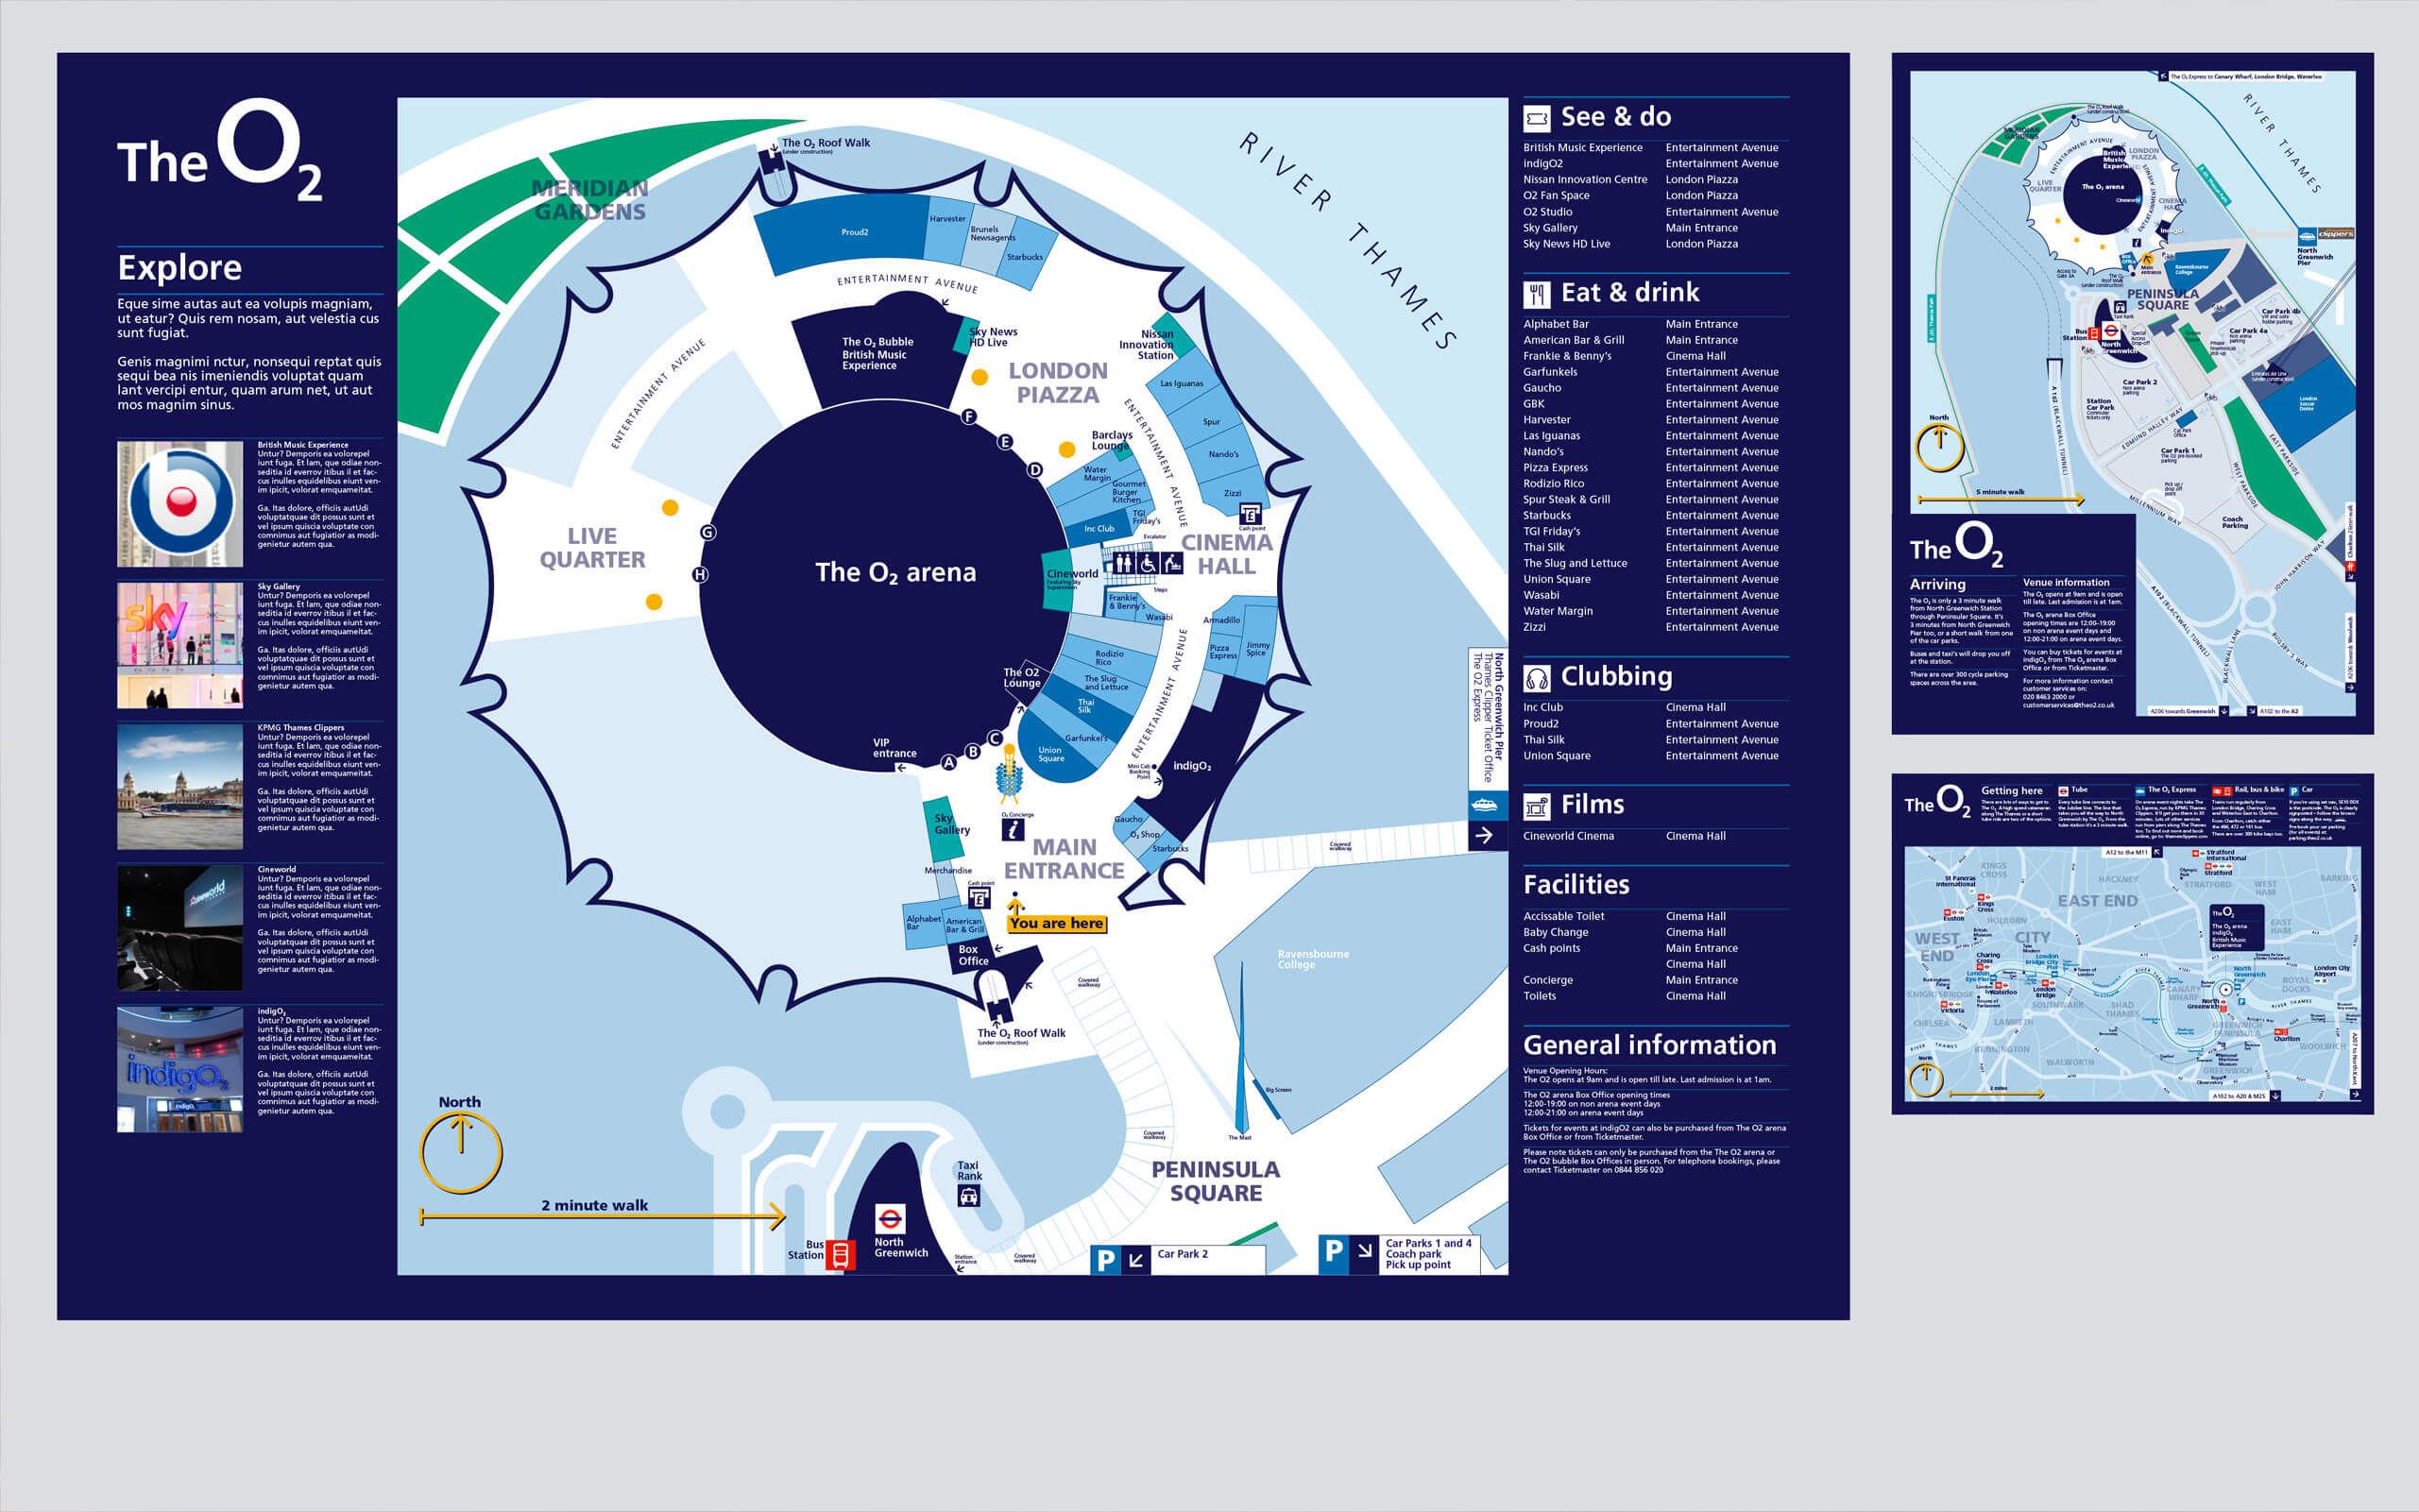 The O2 maps and wayfinding